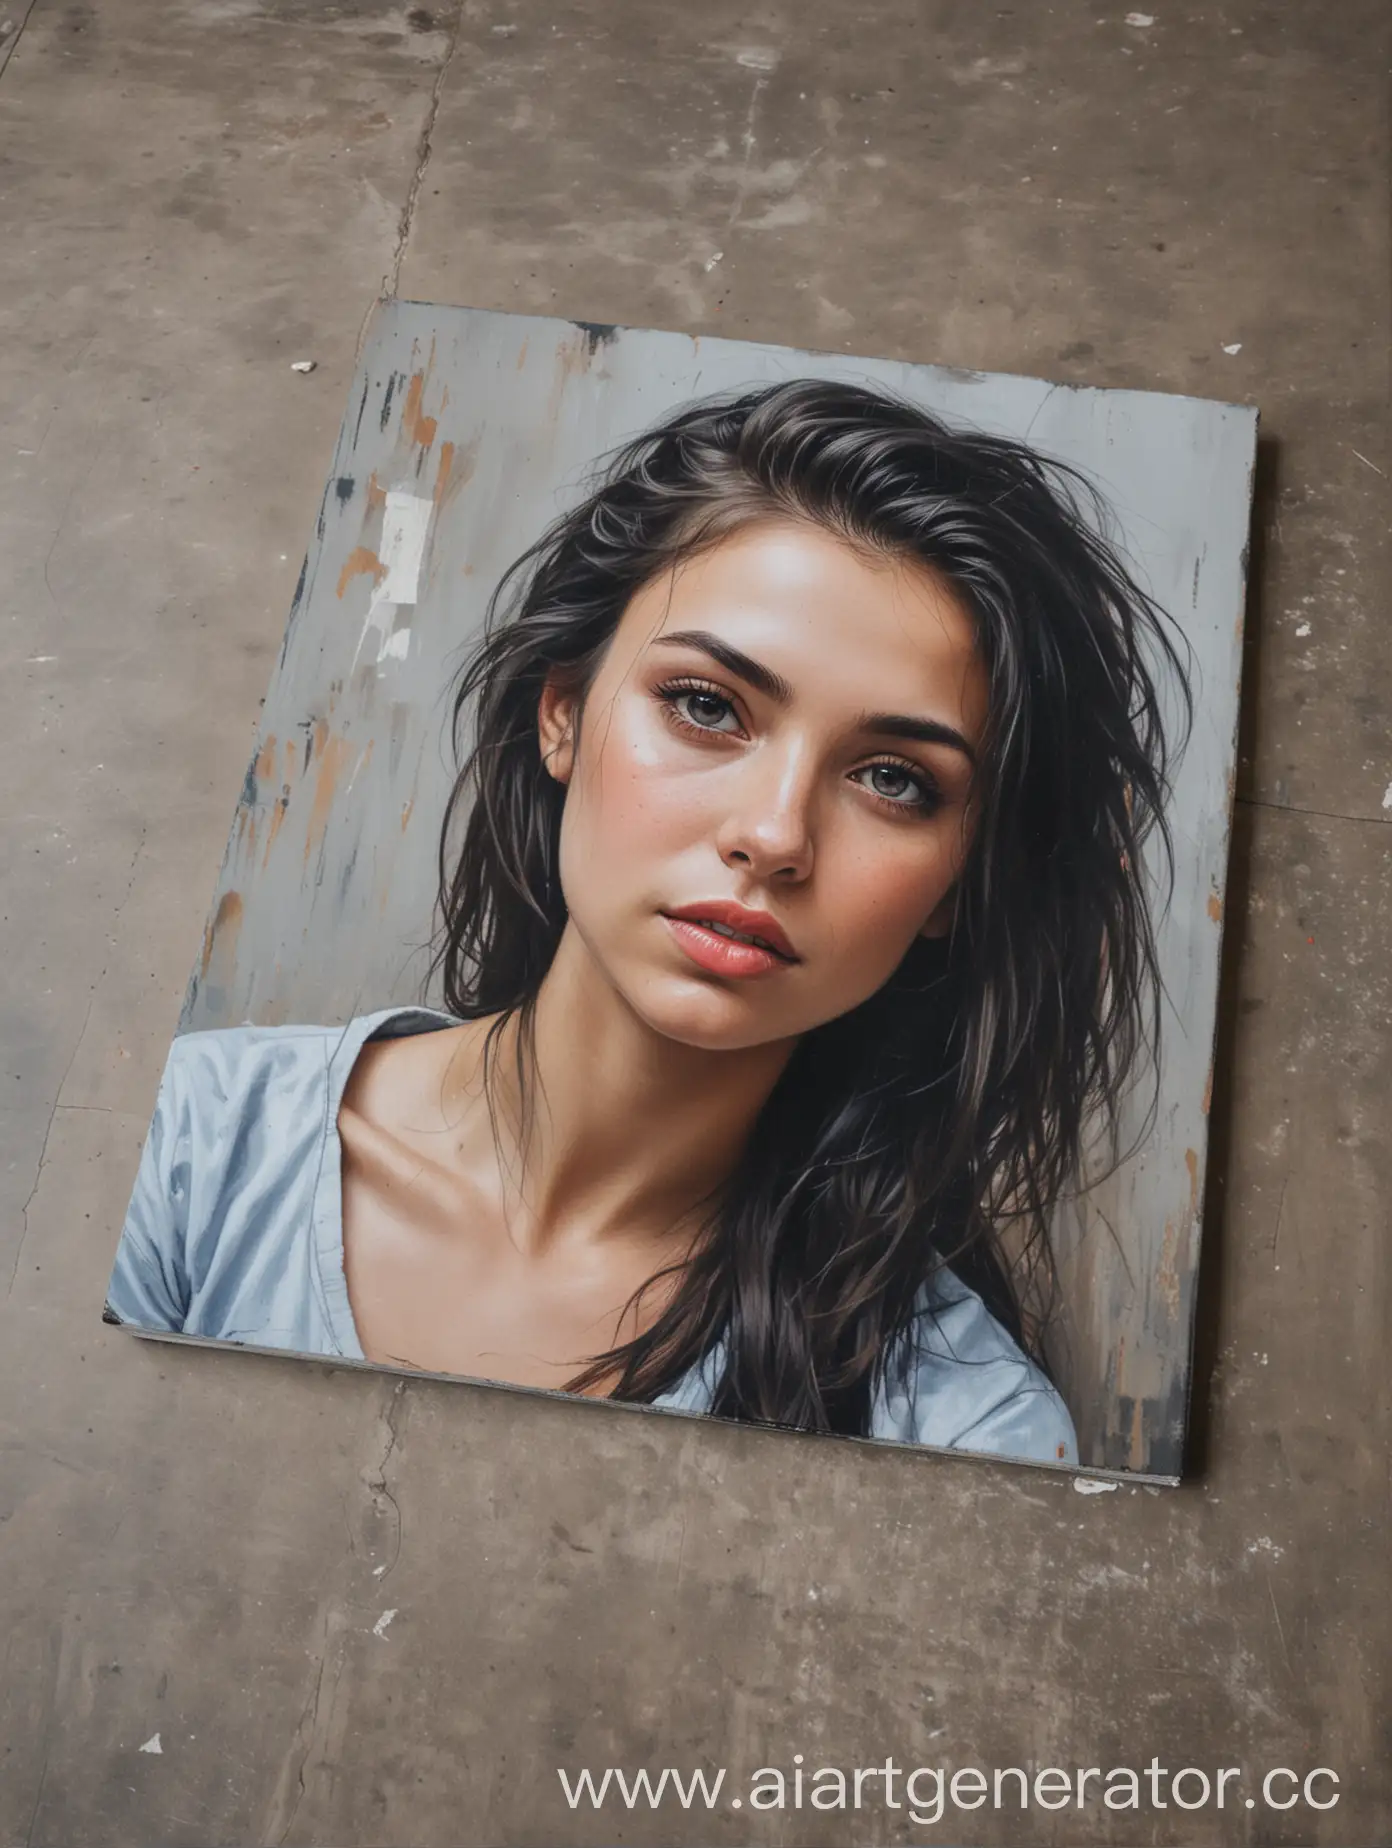 Portrait on canvas 50x70cm stands on the floor leaning on a car wheel.